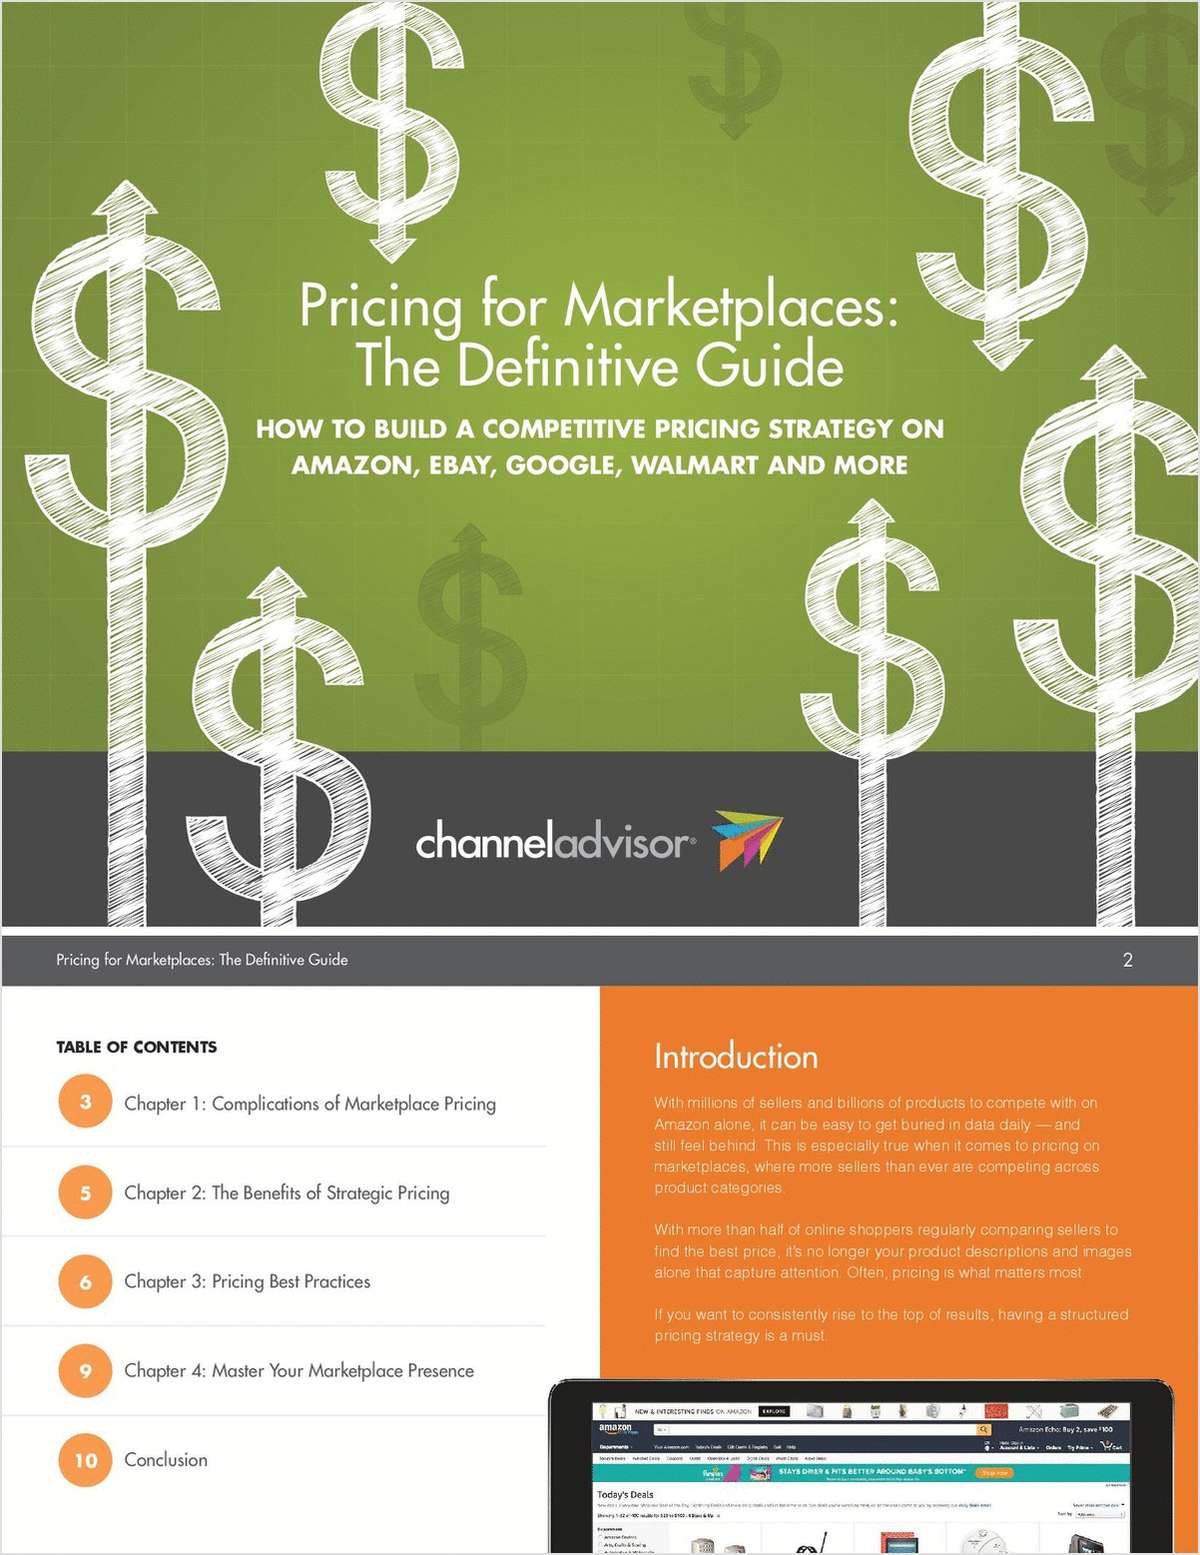 Pricing for Marketplaces: The Definitive Guide